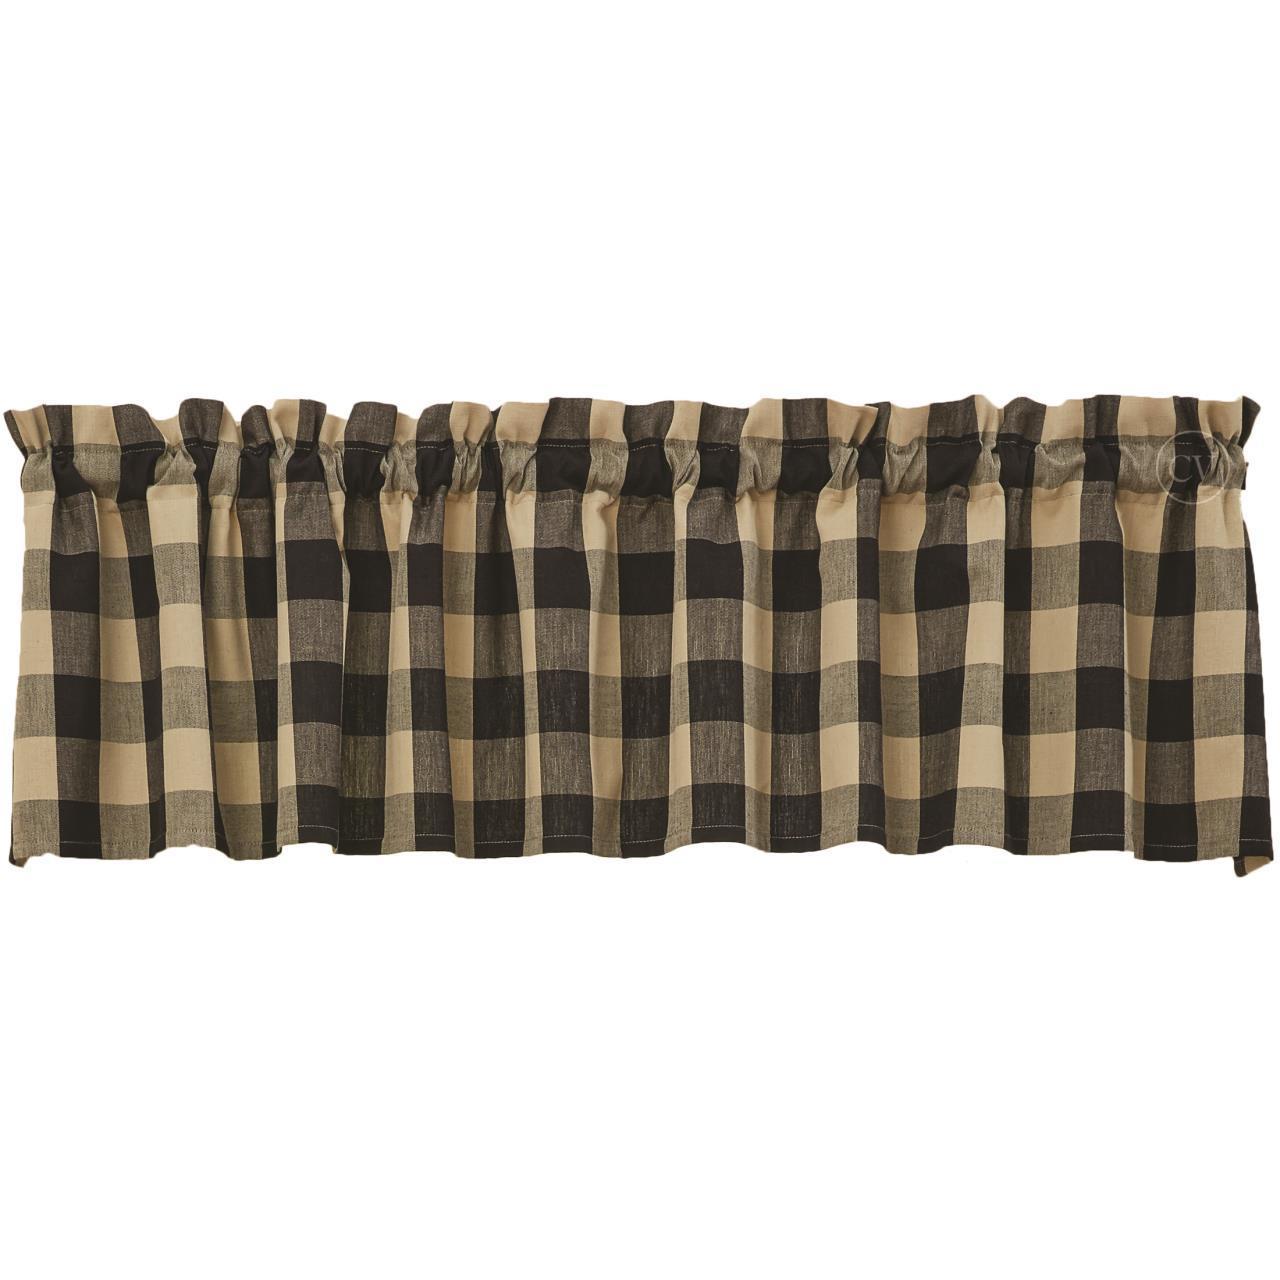 Park Design Tavern Navy Check Unlined Valance 72 x 14 Inches Cotton Farmhouse Country - Olde Church Emporium